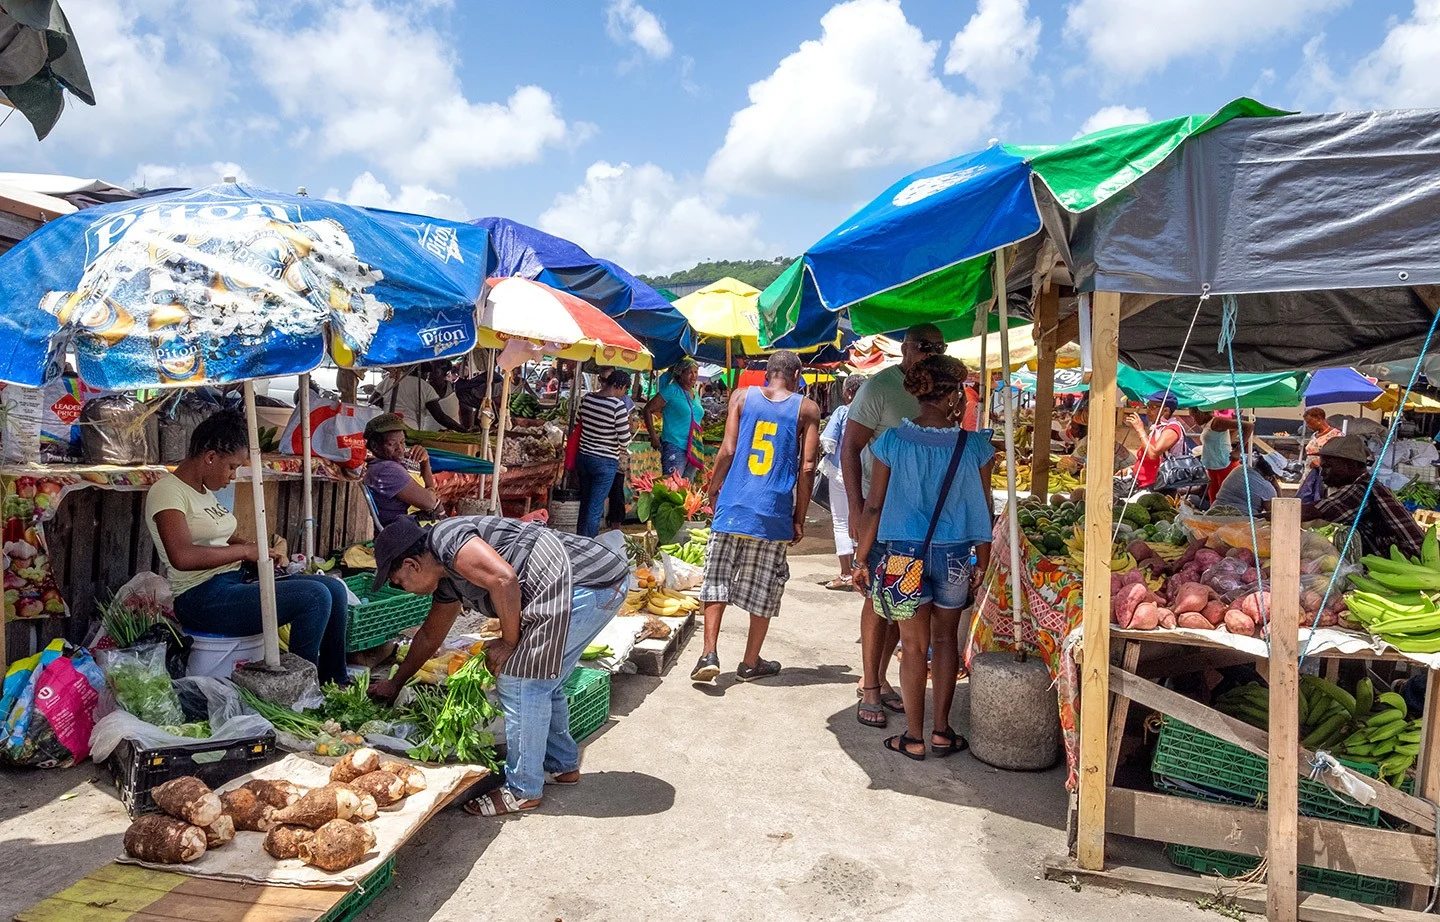 Shopping locally at Castries market in Saint Lucia, one of the ways to travel more sustainably